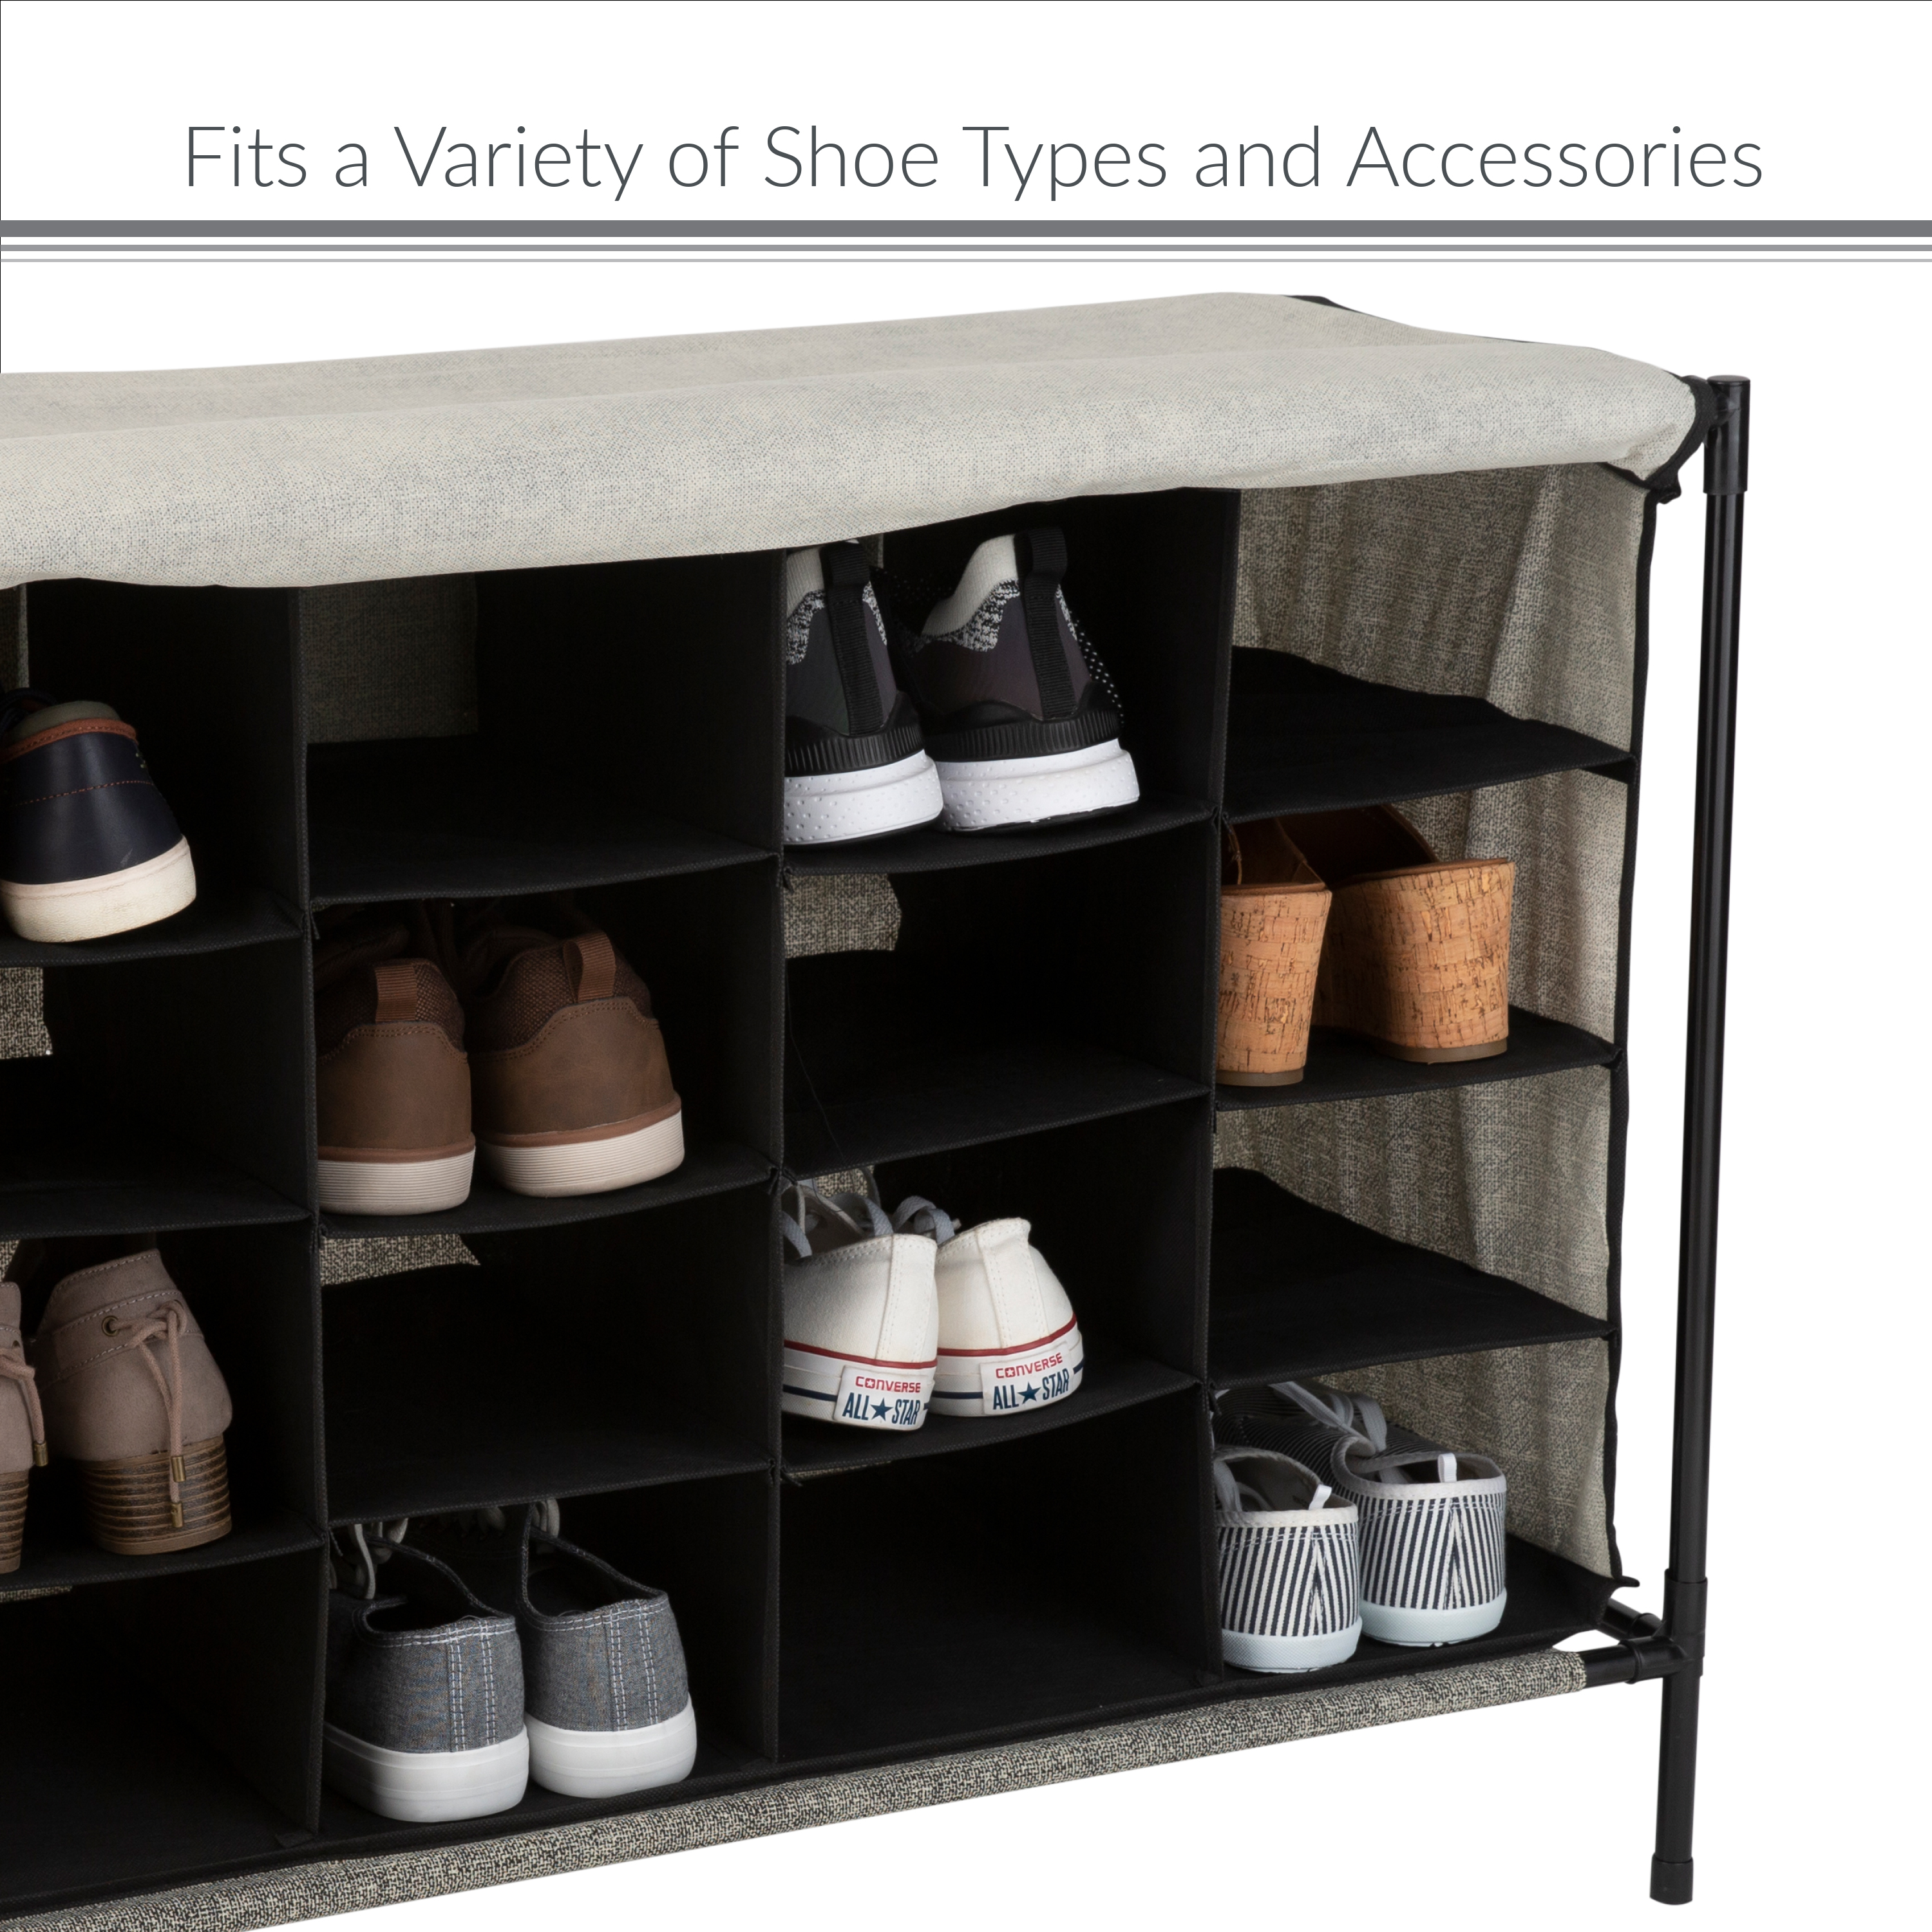 Simplify 16 Compartment 4 Tier Fabric Shoe Cubby in Black - image 5 of 10